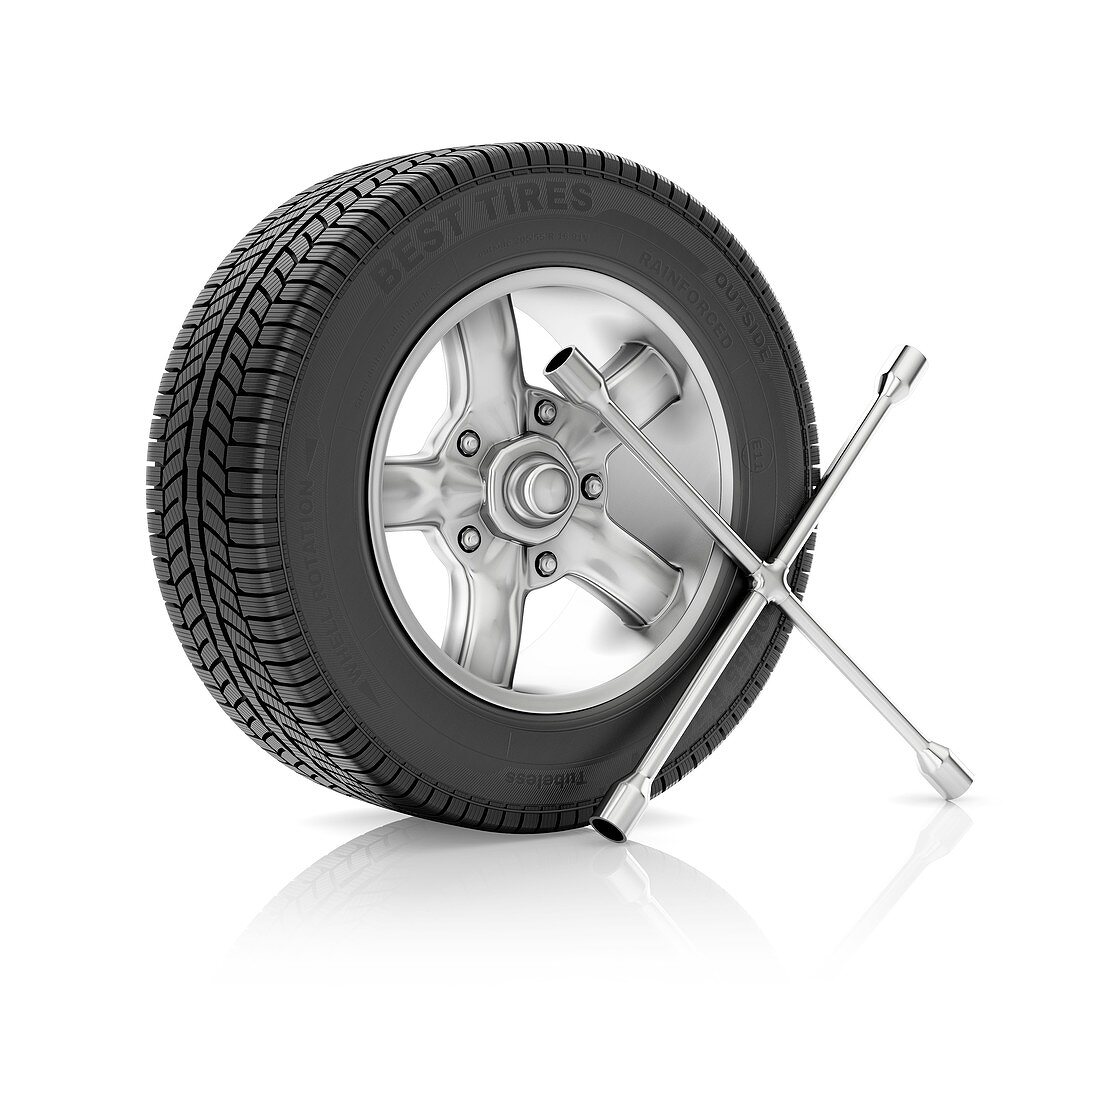 Car wheel with tyre wrench, illustration